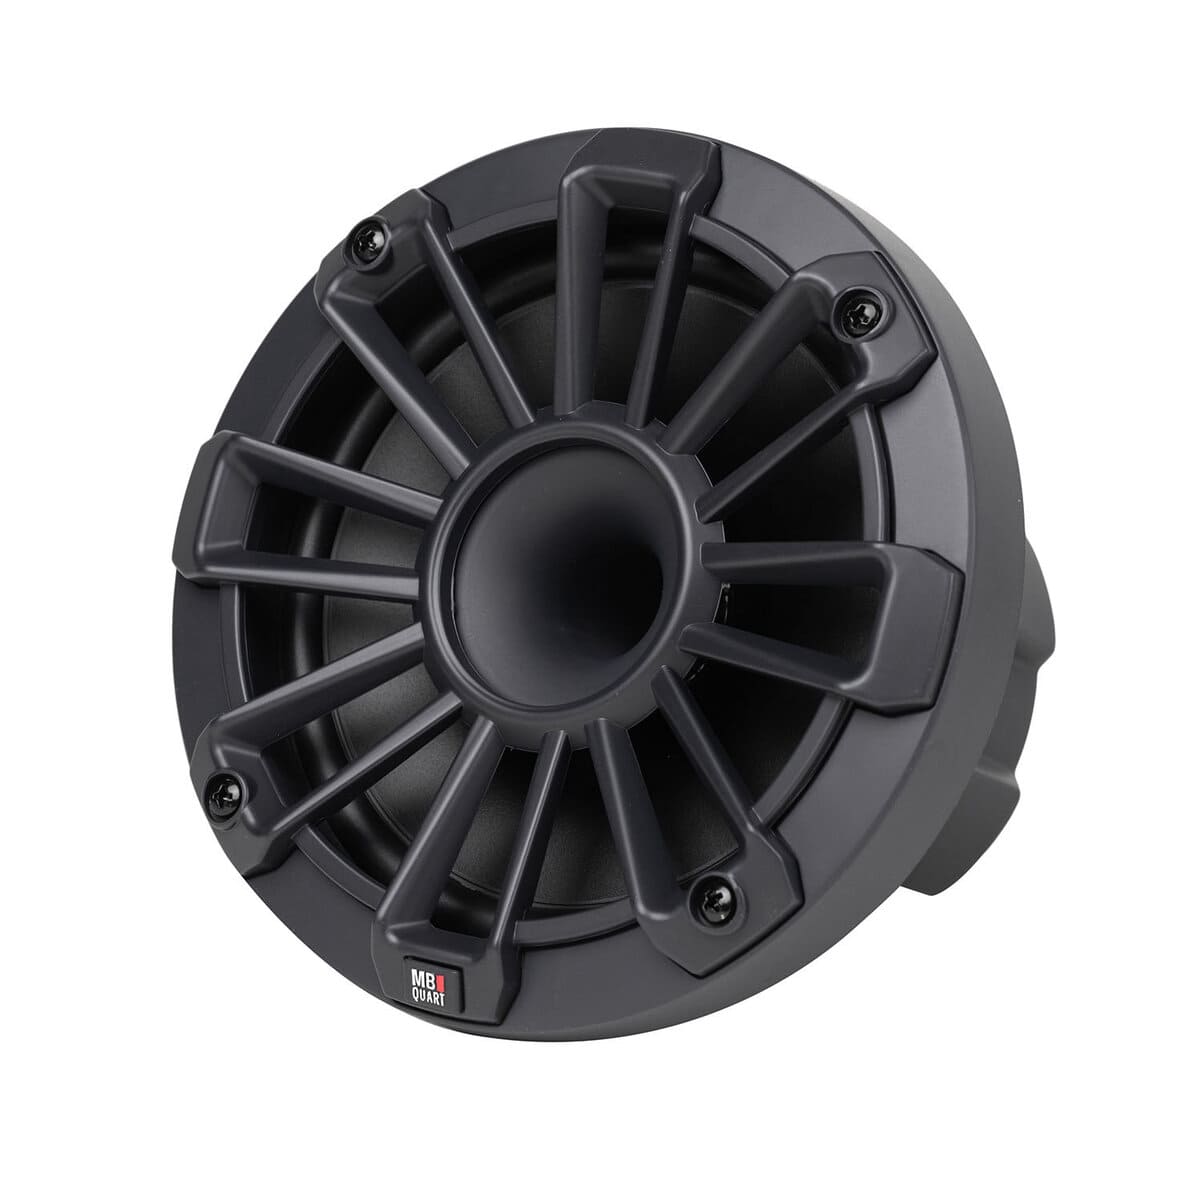 MB Quart NH2-116 Nautic 6.5 Inch Compression Horn Speakers